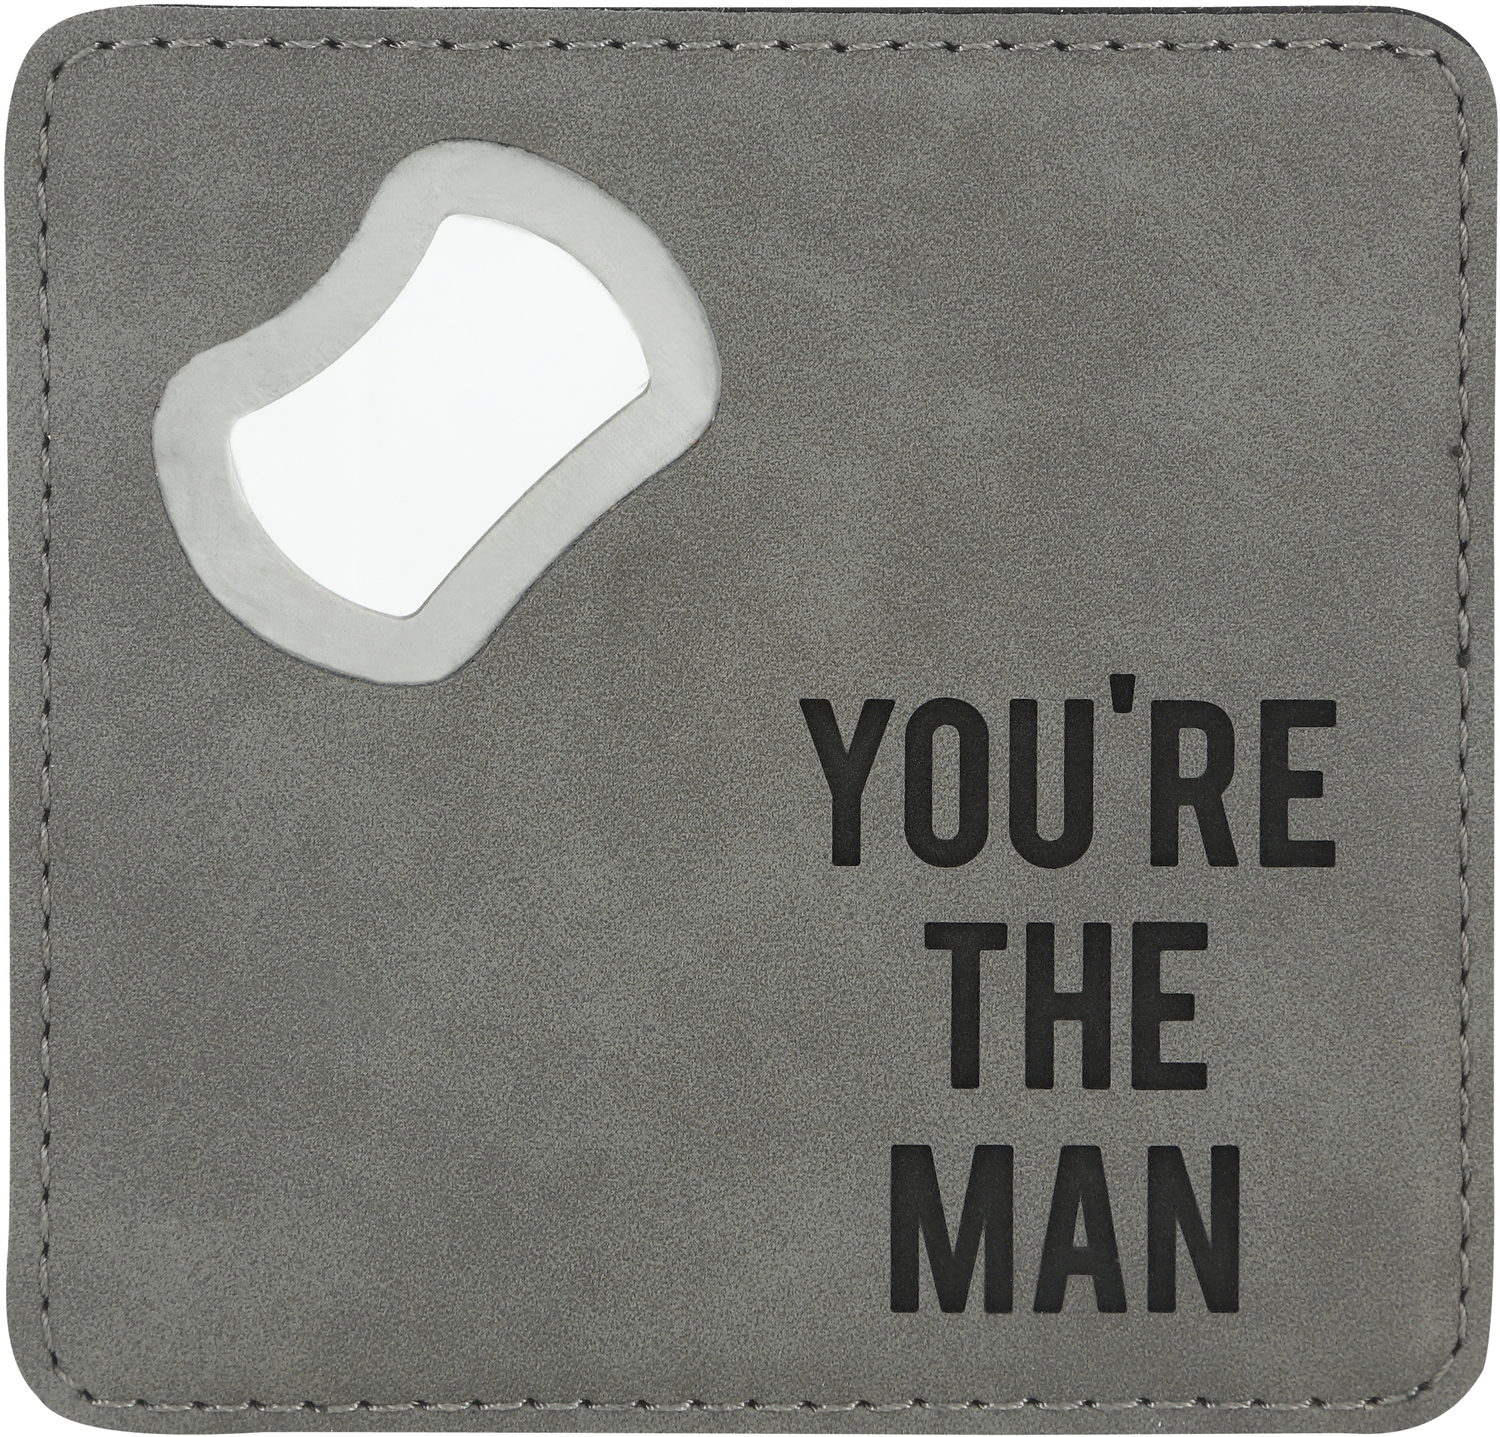 You're The Man by Man Made - You're The Man - 4" x 4" Bottle Opener Coaster